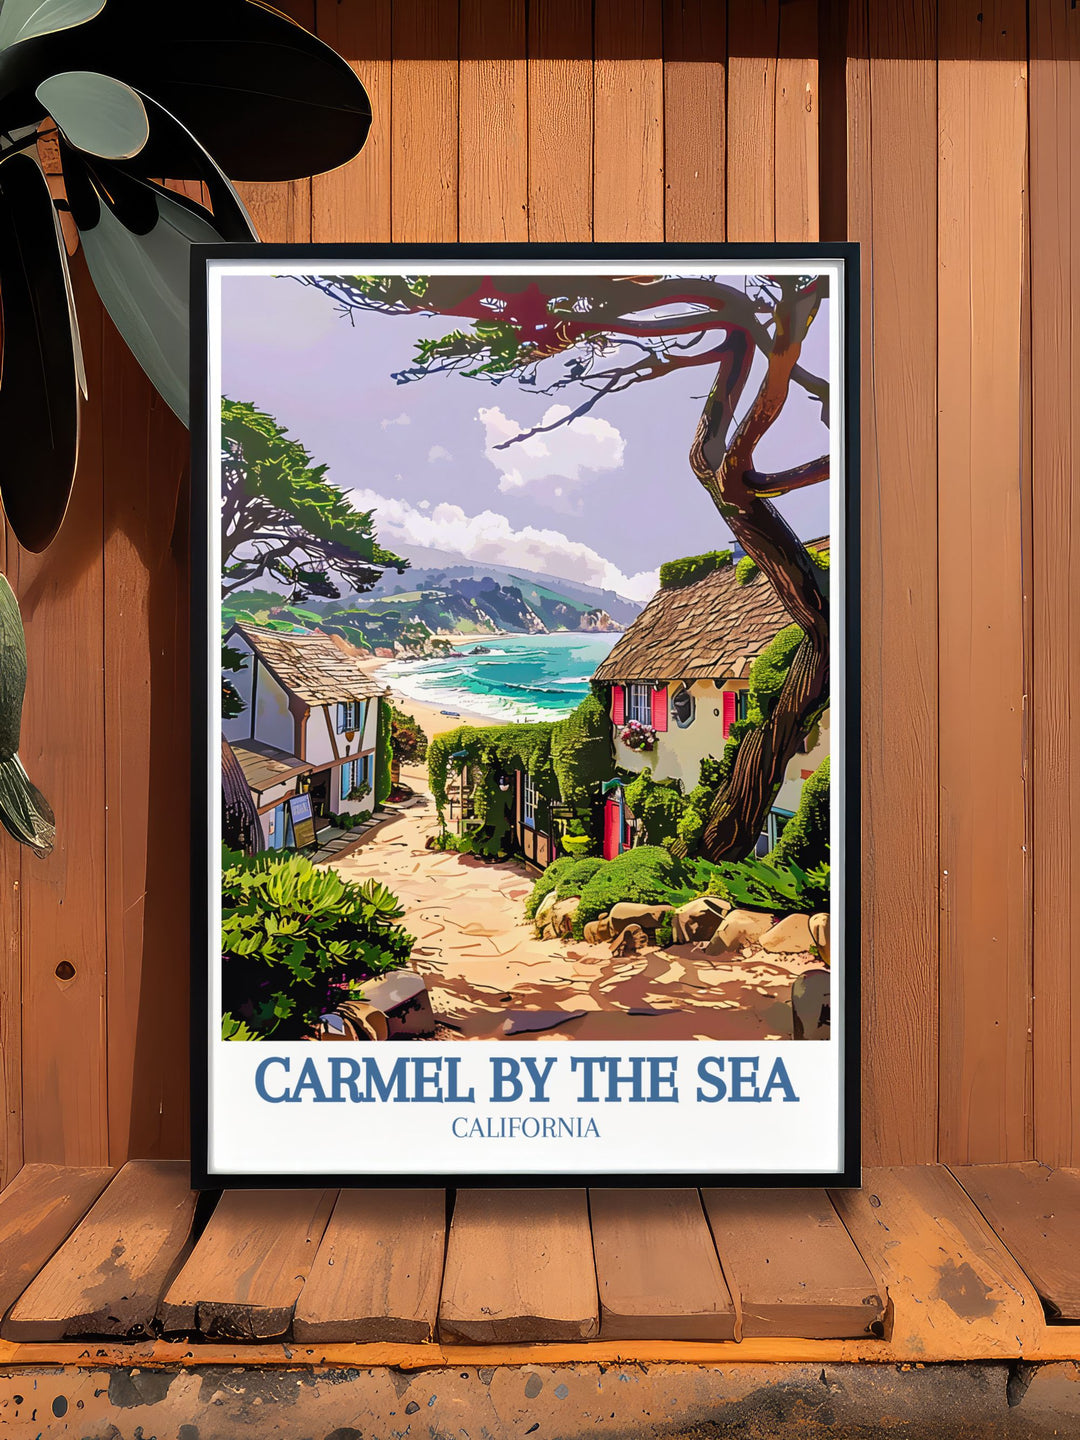 Showcasing the enchanting FairyTale Cottages of Carmel by the Sea, this travel poster highlights their storybook architecture and lush gardens. Ideal for adding a touch of whimsical charm to your home decor and celebrating the islands artistic beauty.